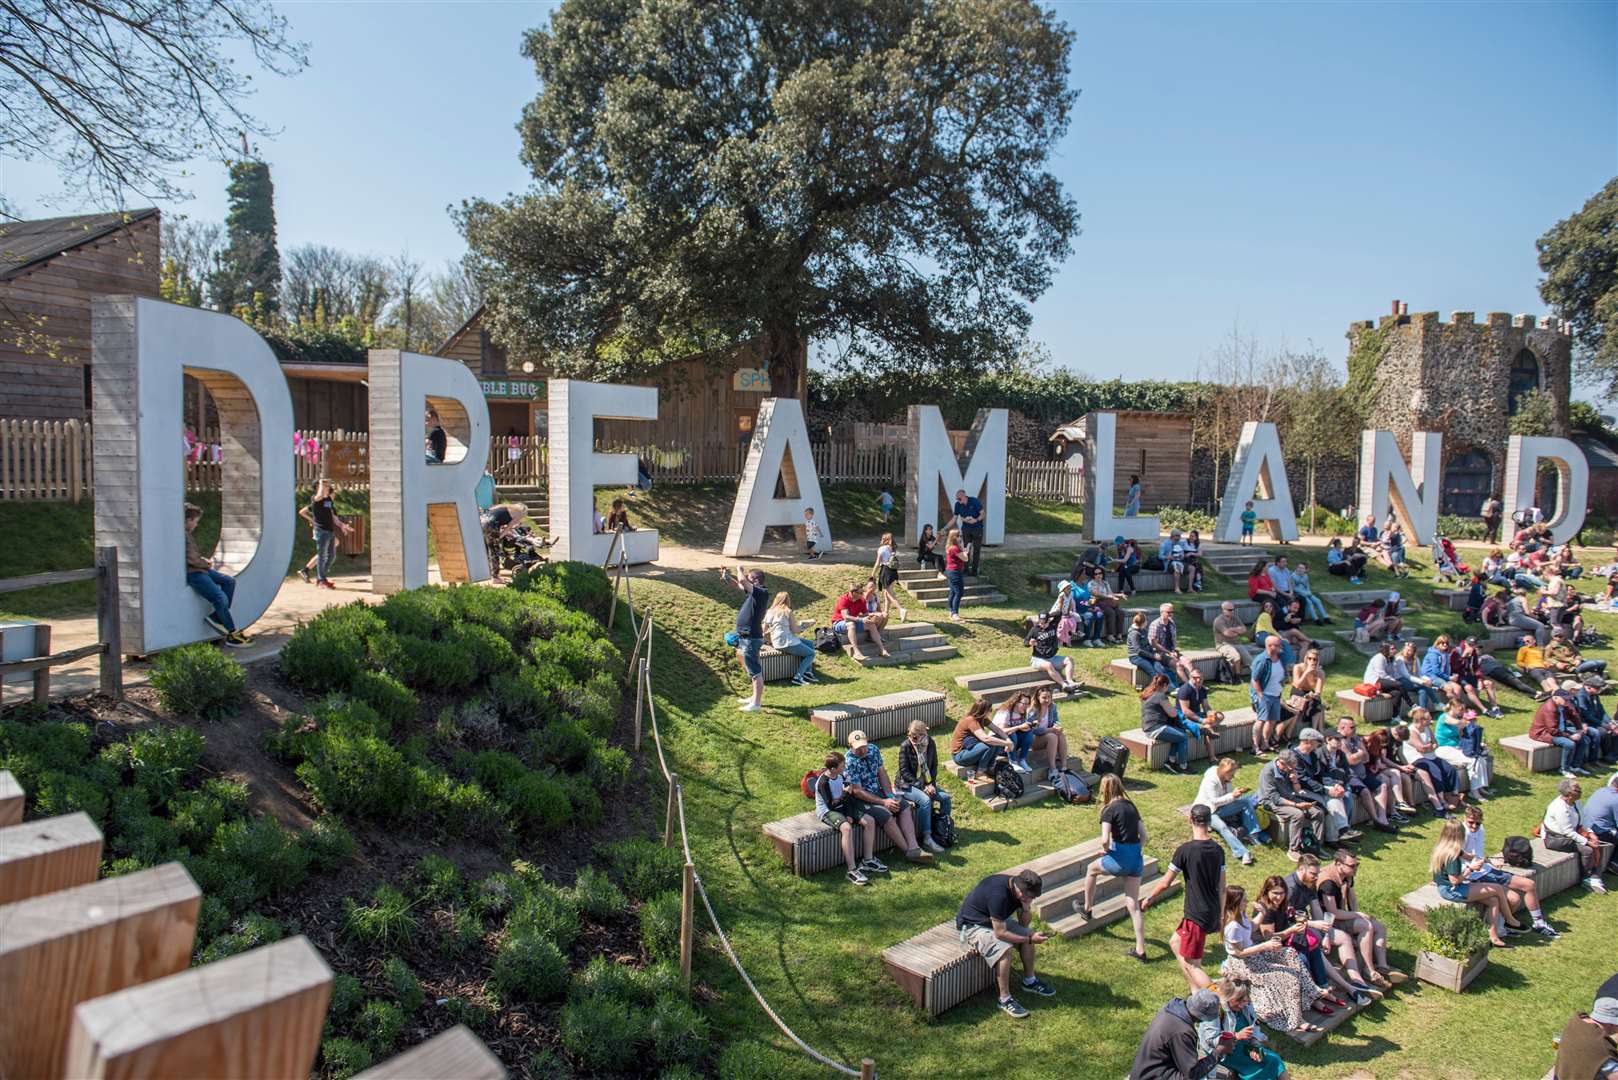 Dreamland has hosted a string of stellar live music events this summer. Picture: Dreamland